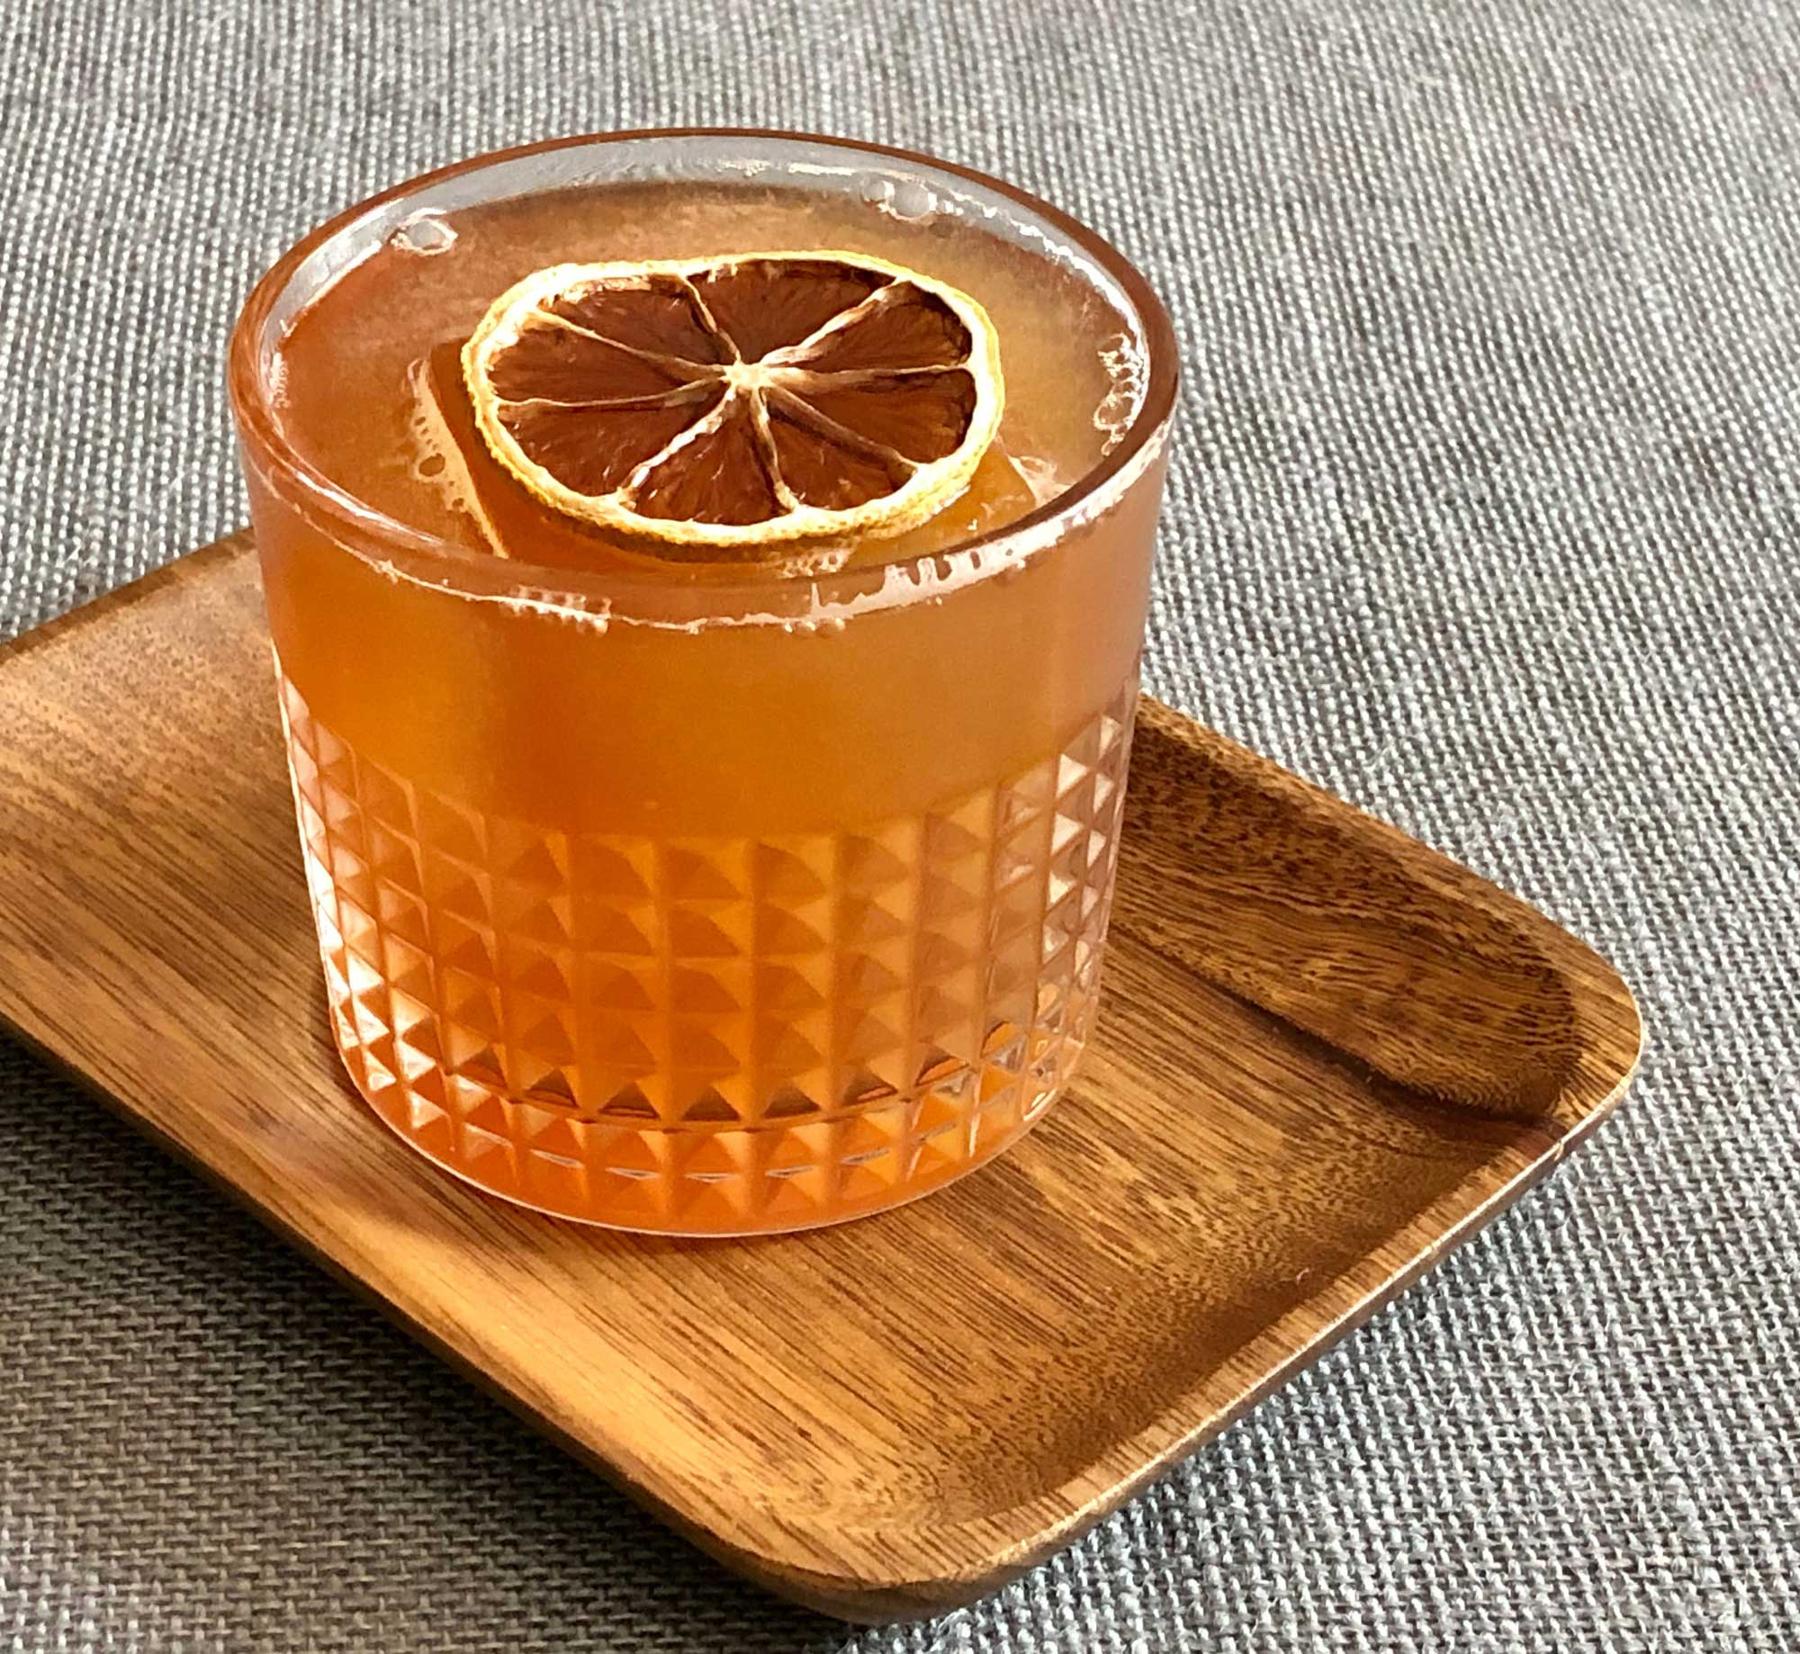 An example of the Blackheart, the mixed drink (drink), by Brick & Mortar, Cambridge, MA, featuring amber ale, Batavia Arrack van Oosten, St. Elizabeth Allspice Dram, brown sugar syrup, orange juice, lime juice, and Angostura bitters; photo by Lee Edwards